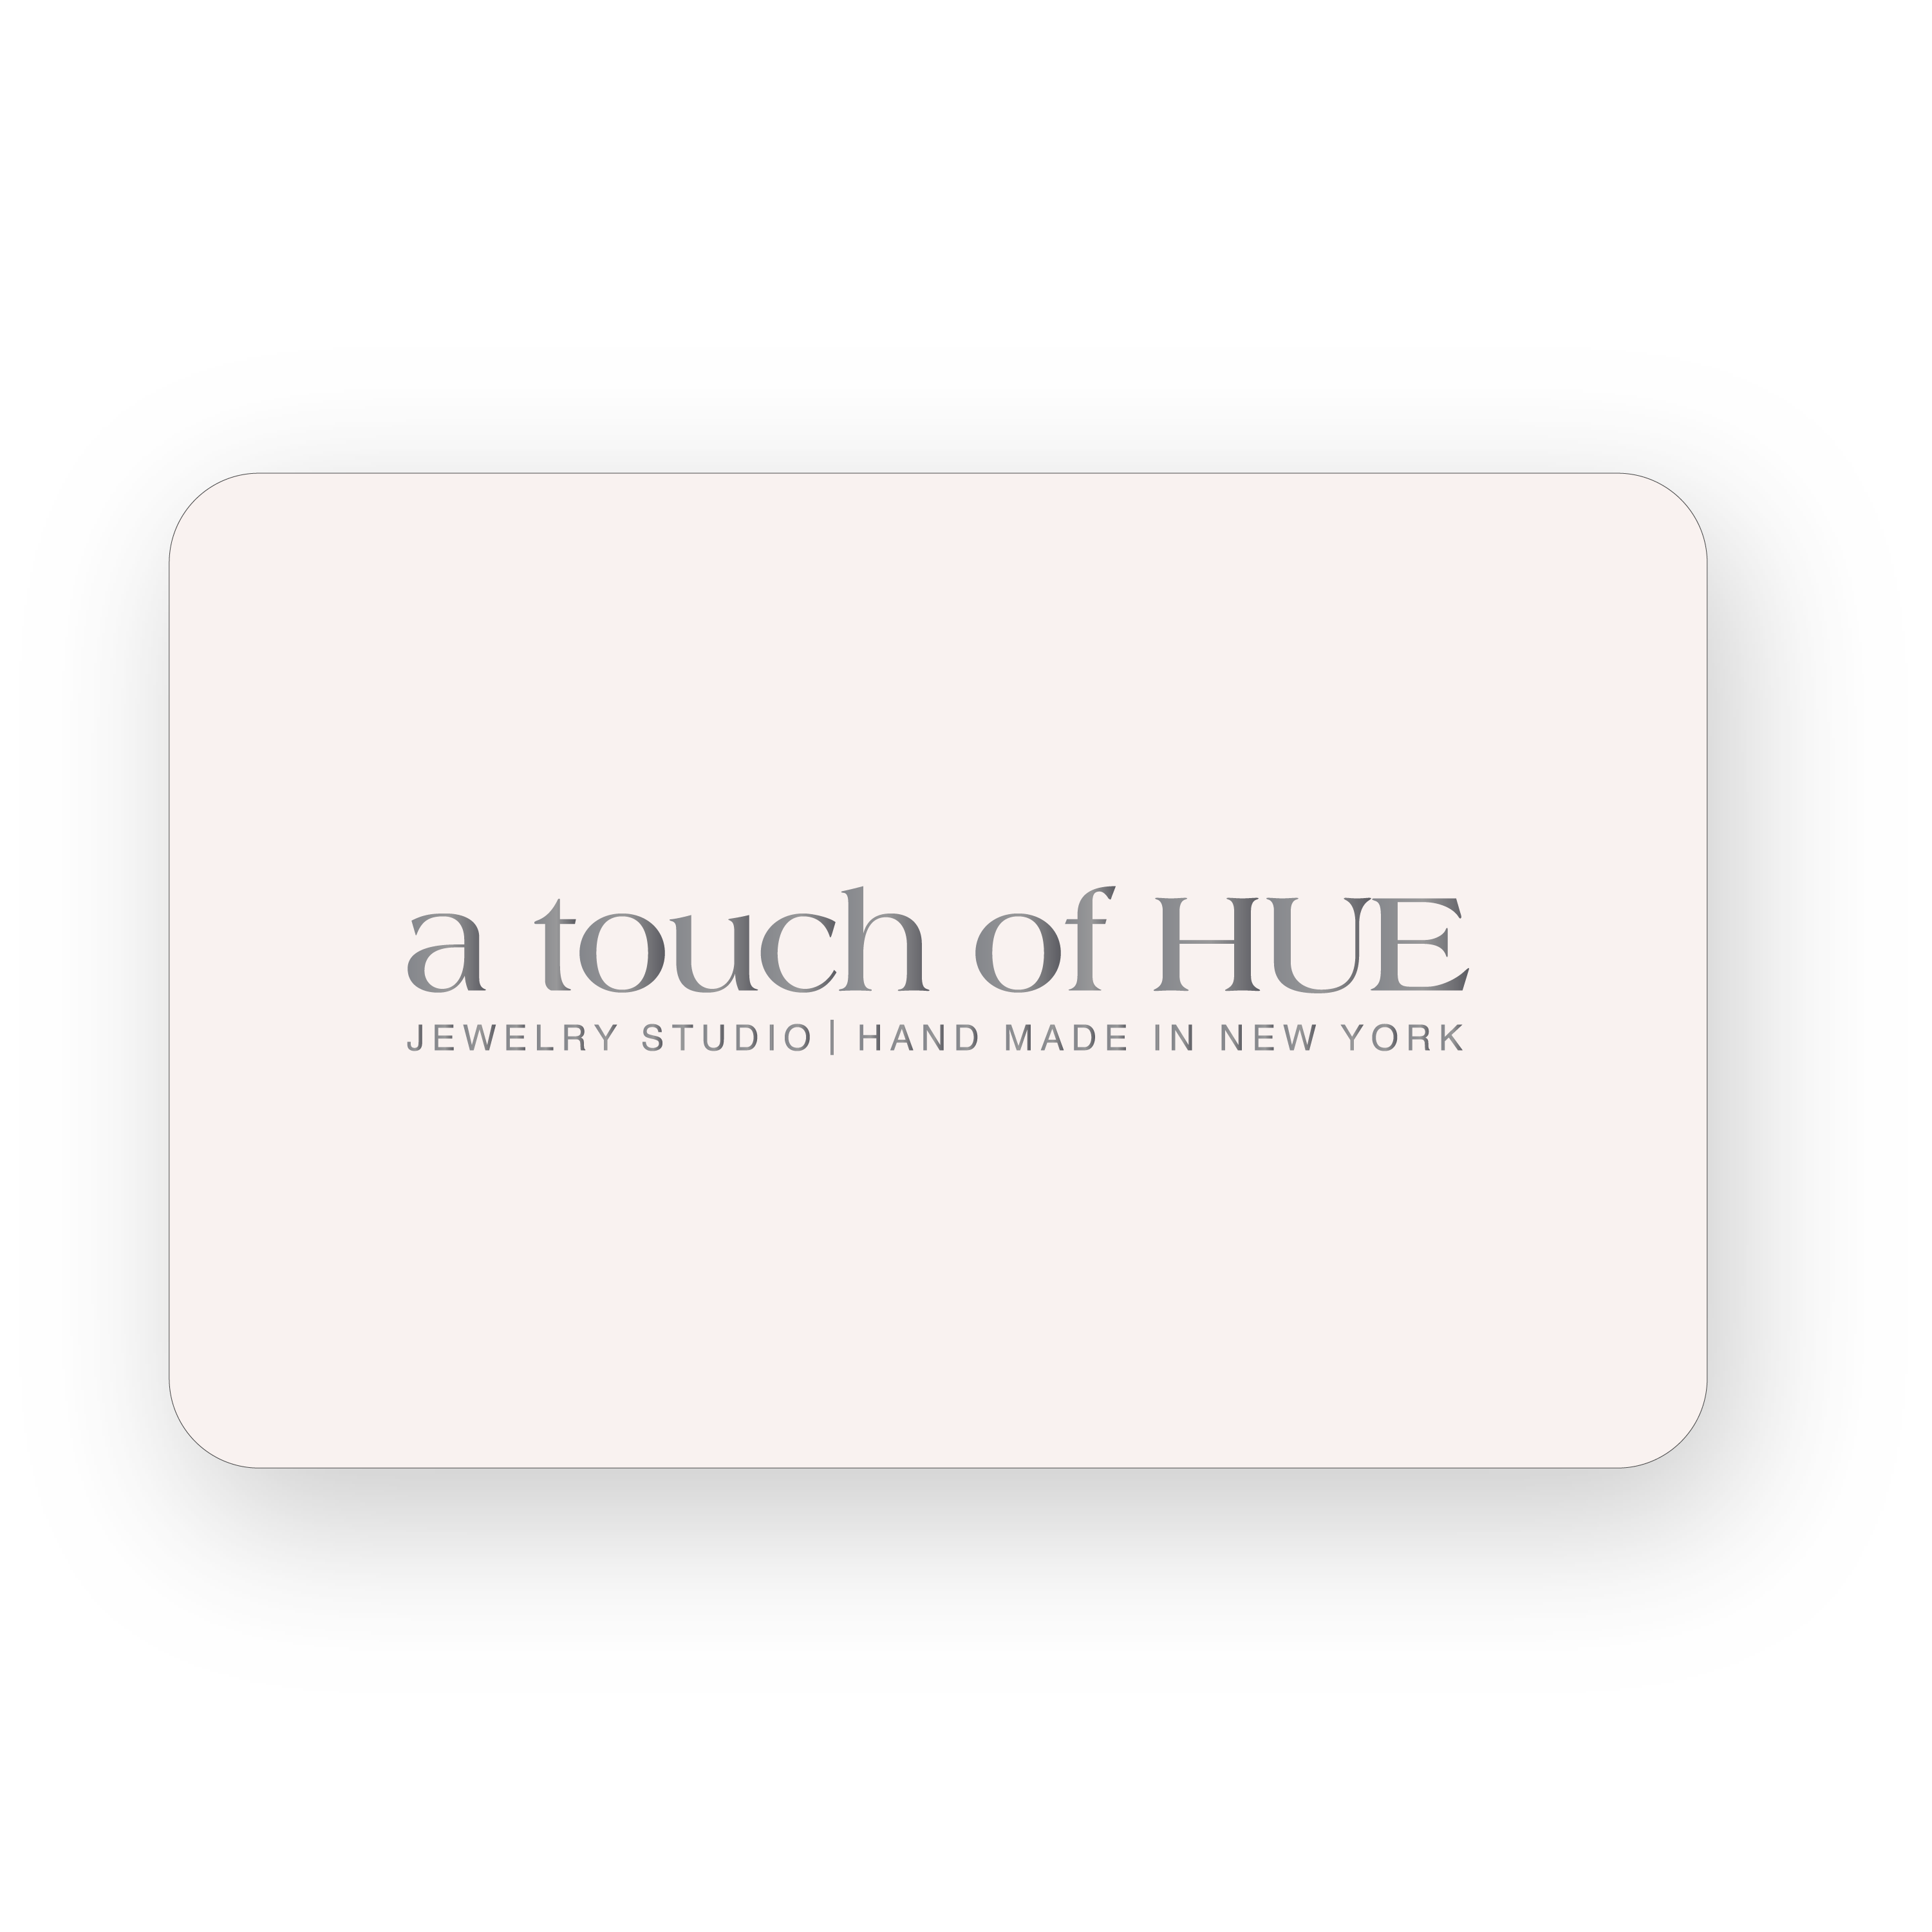 a touch of HUE gift cards